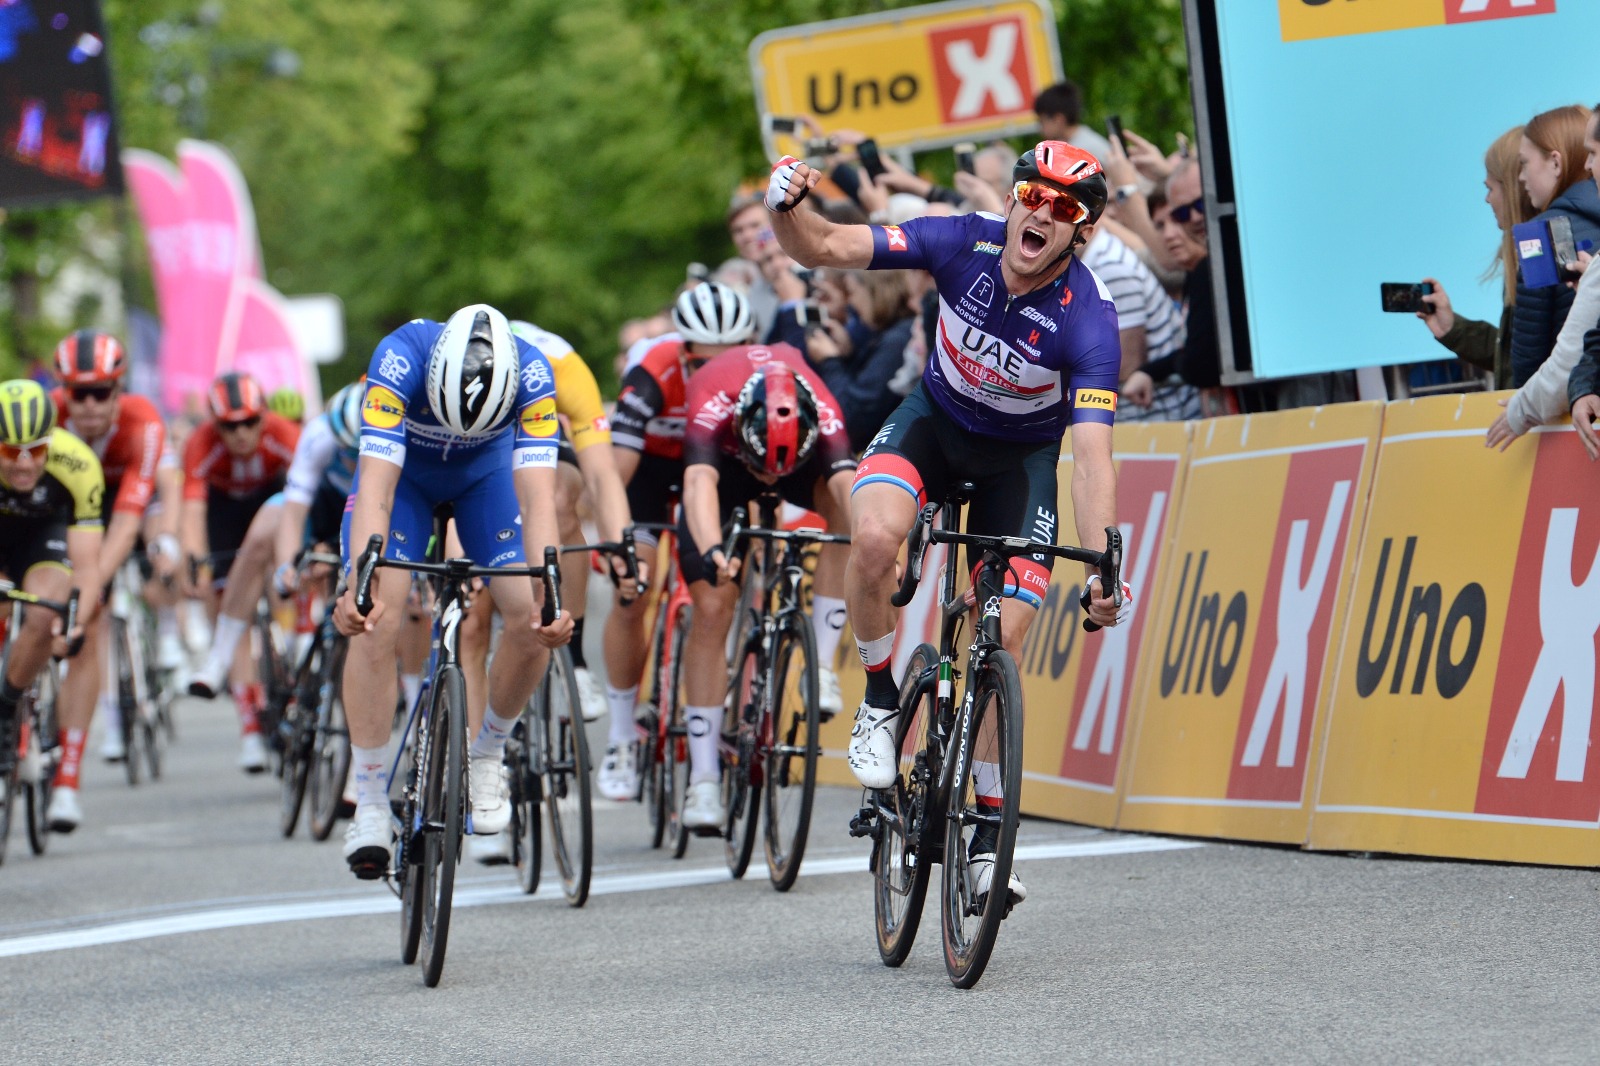 Kristoff takes the win and the Yellow Jersey in Drammen!